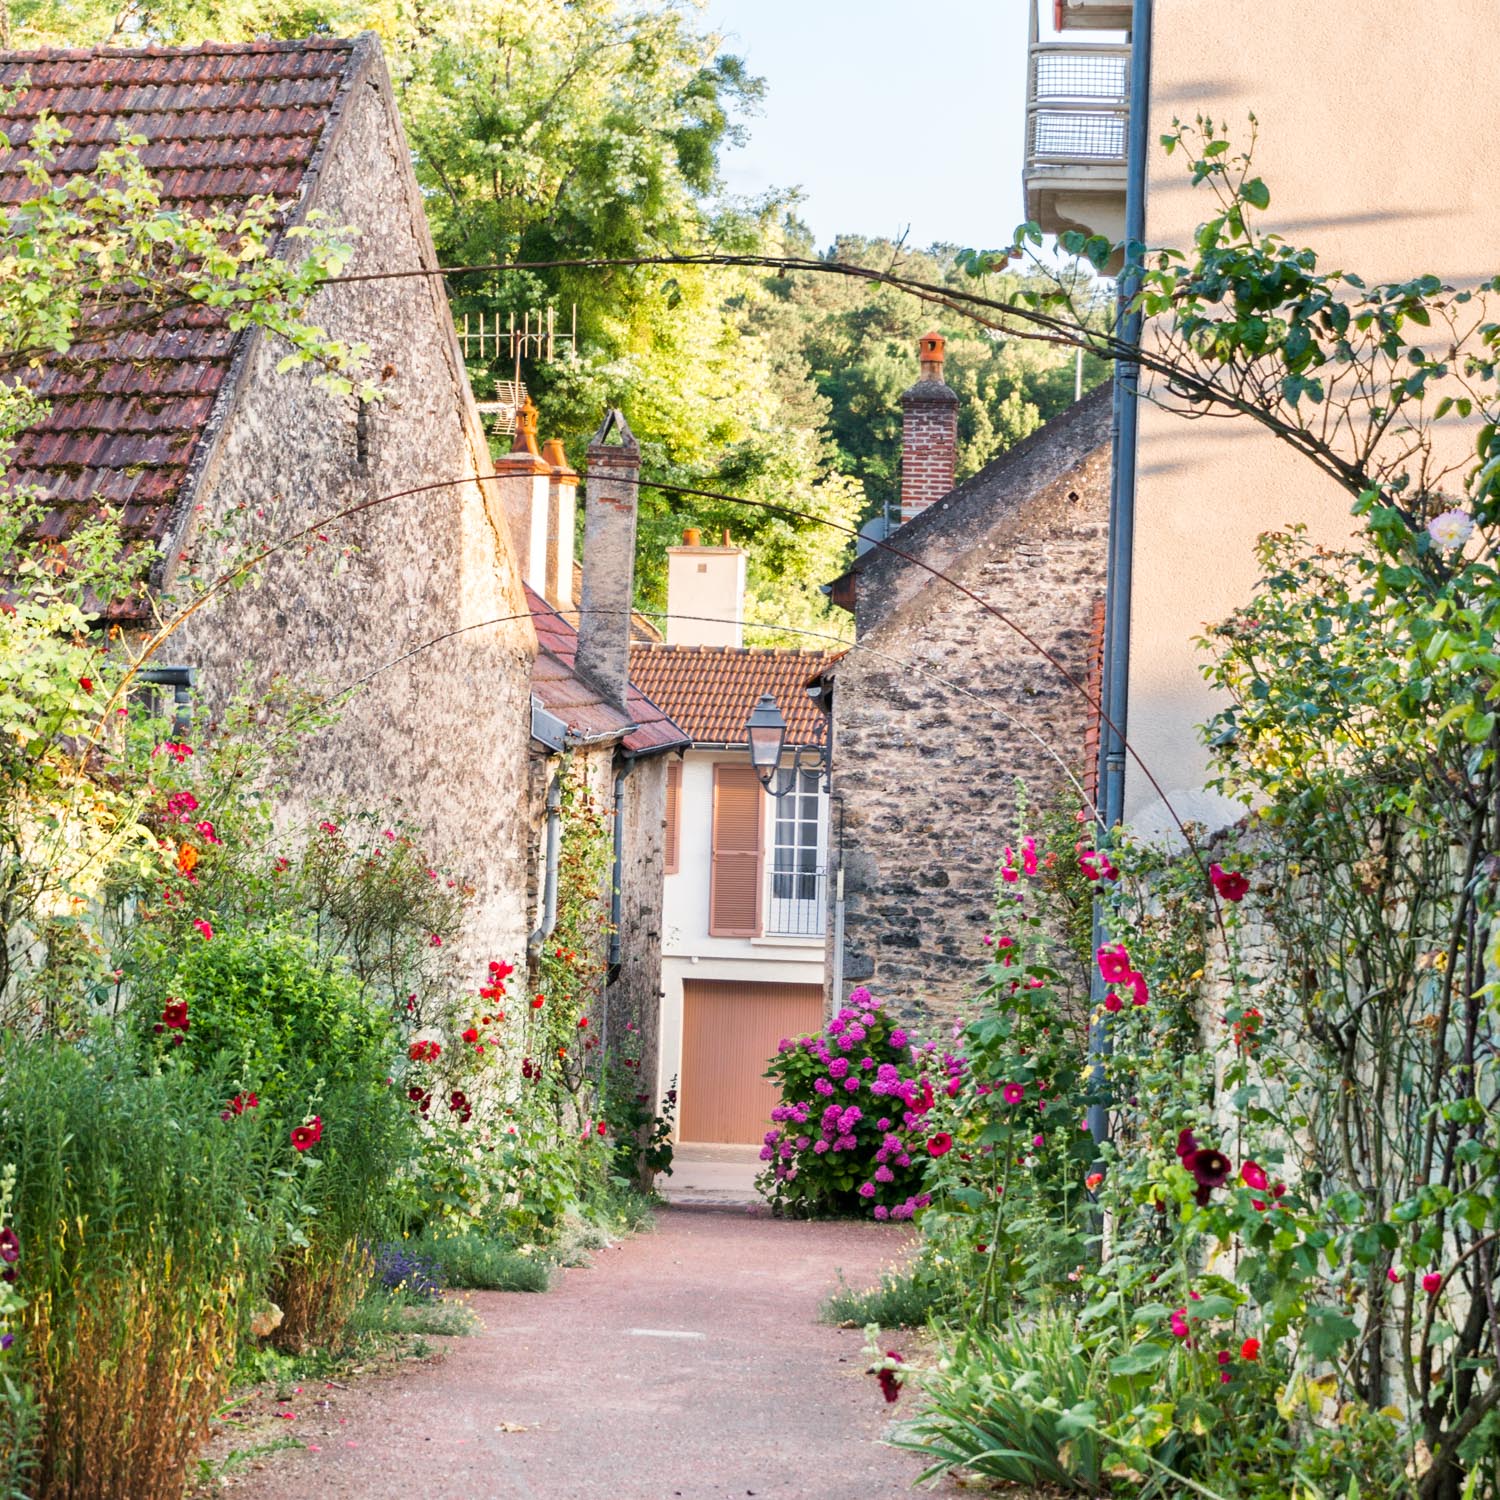 A month in France – little villages and a spot to rest for the night